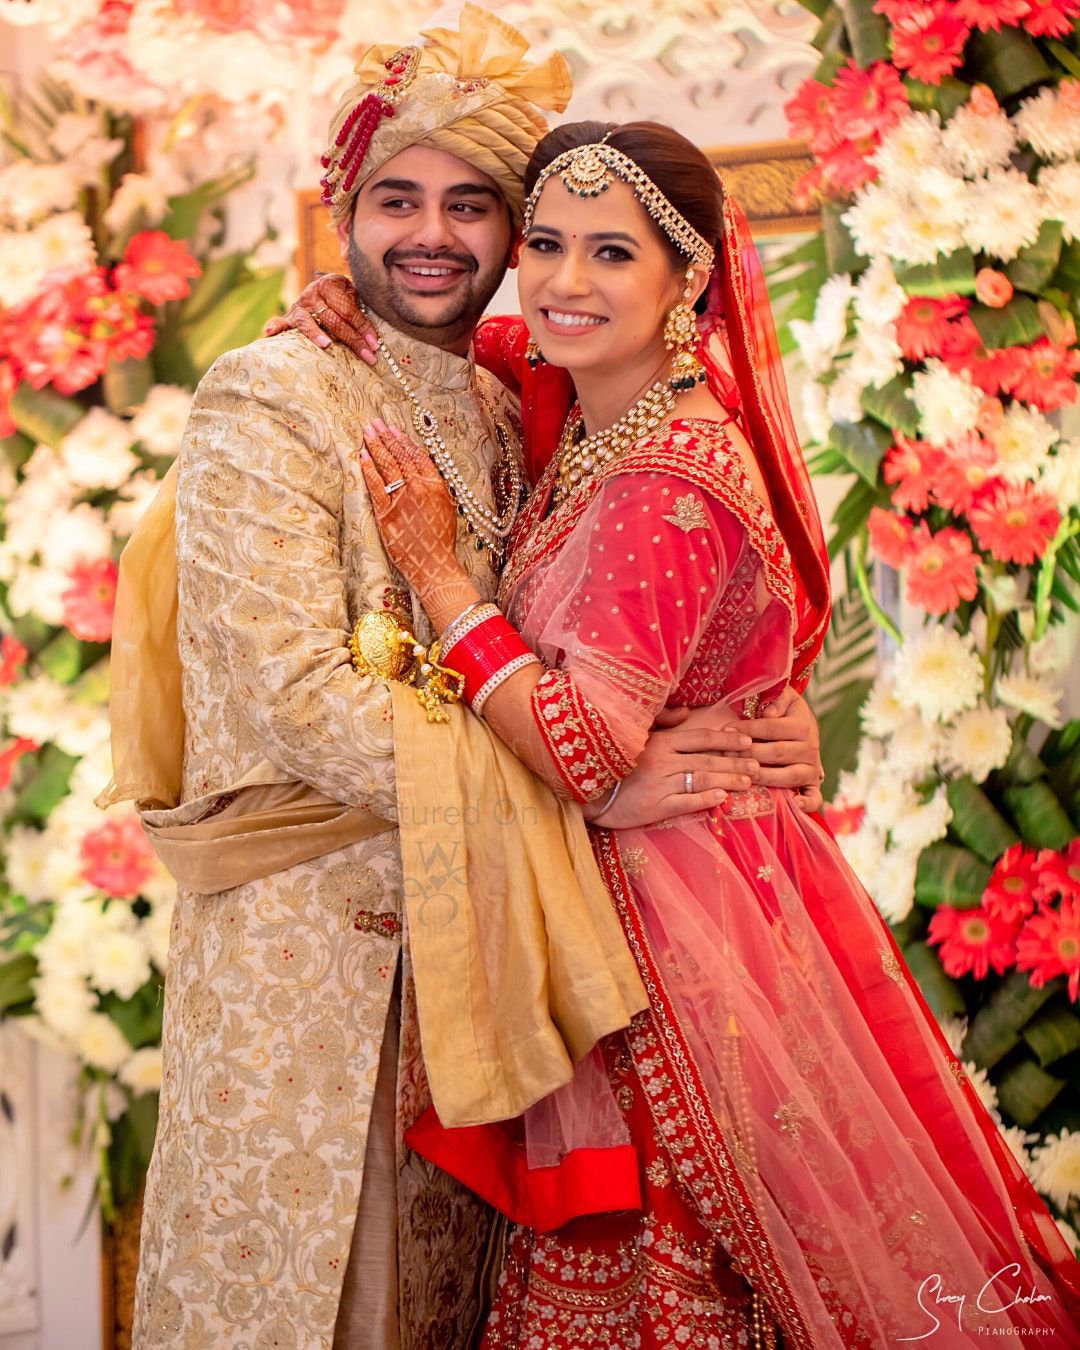 SFO 2021 - After Covid Matrimony Event! (SOUTH ASIANS & INDIANS)